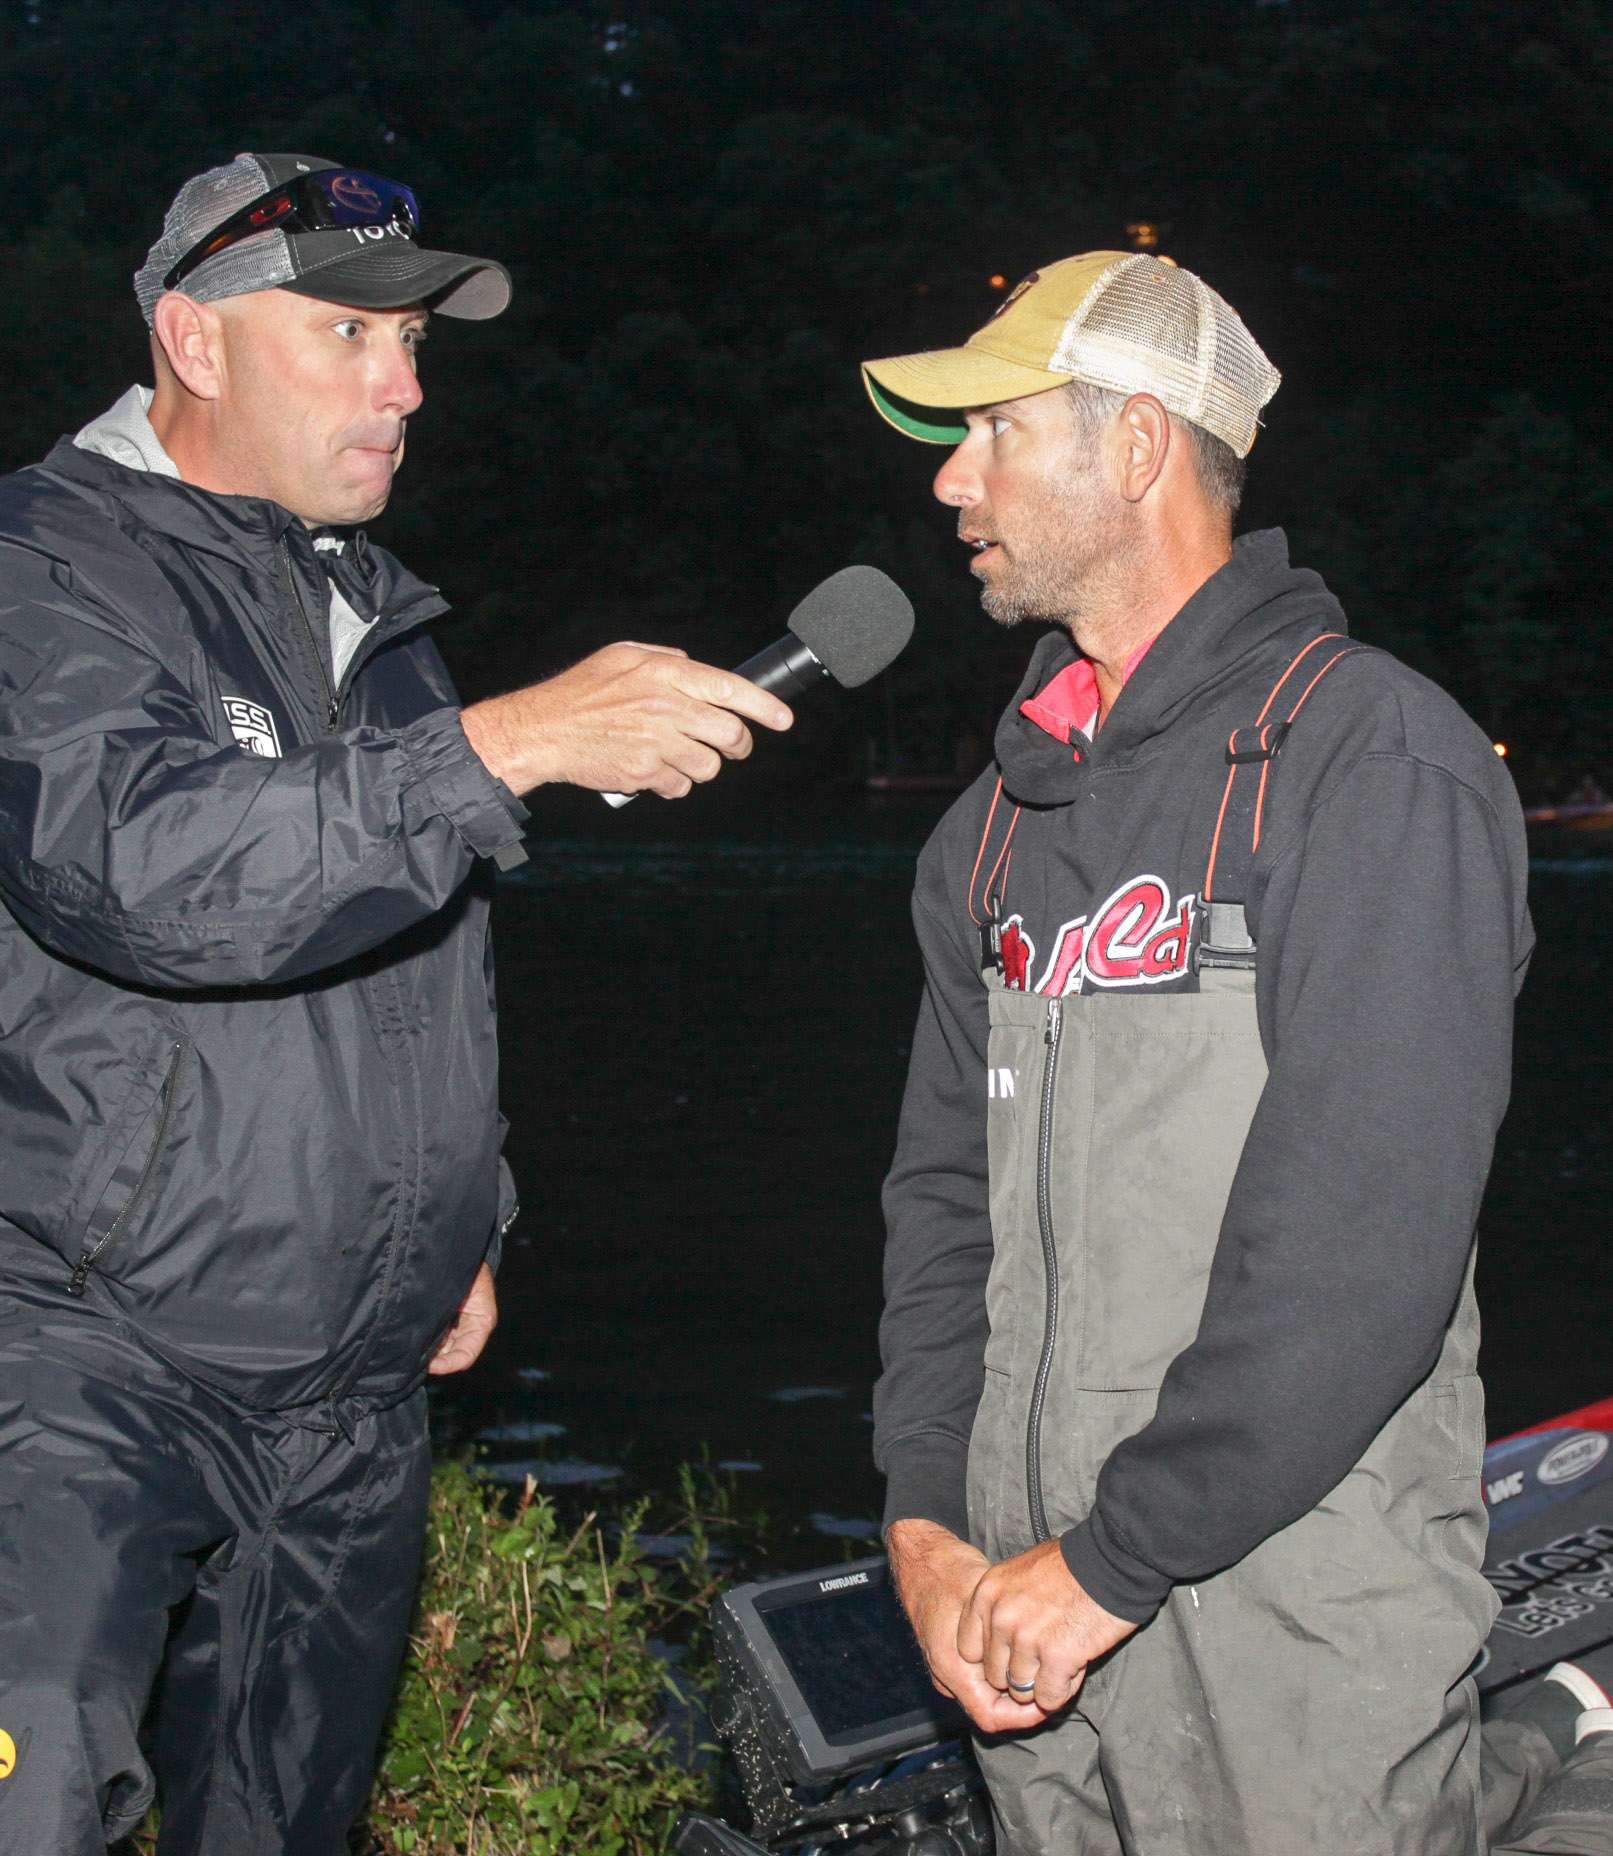 Dave also talks to Ike for the fans at takeoff and bassmaster.com.